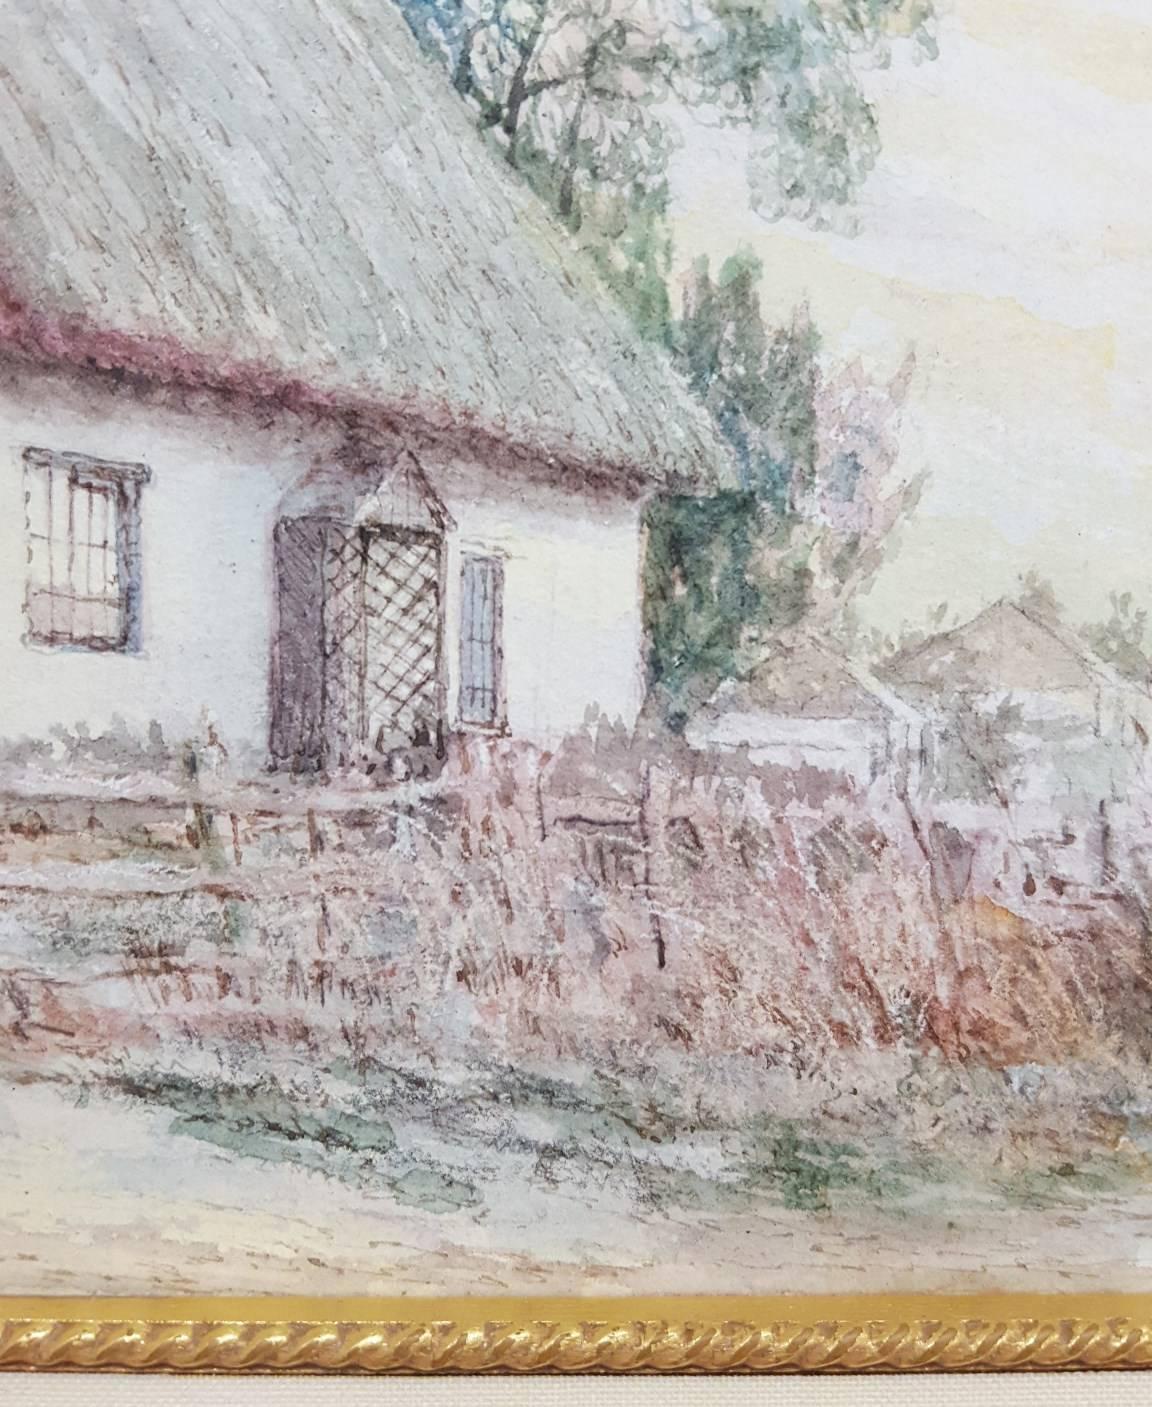 Cottage at Huttoft, Lincolnshire, UK - Victorian Art by Harry Turner